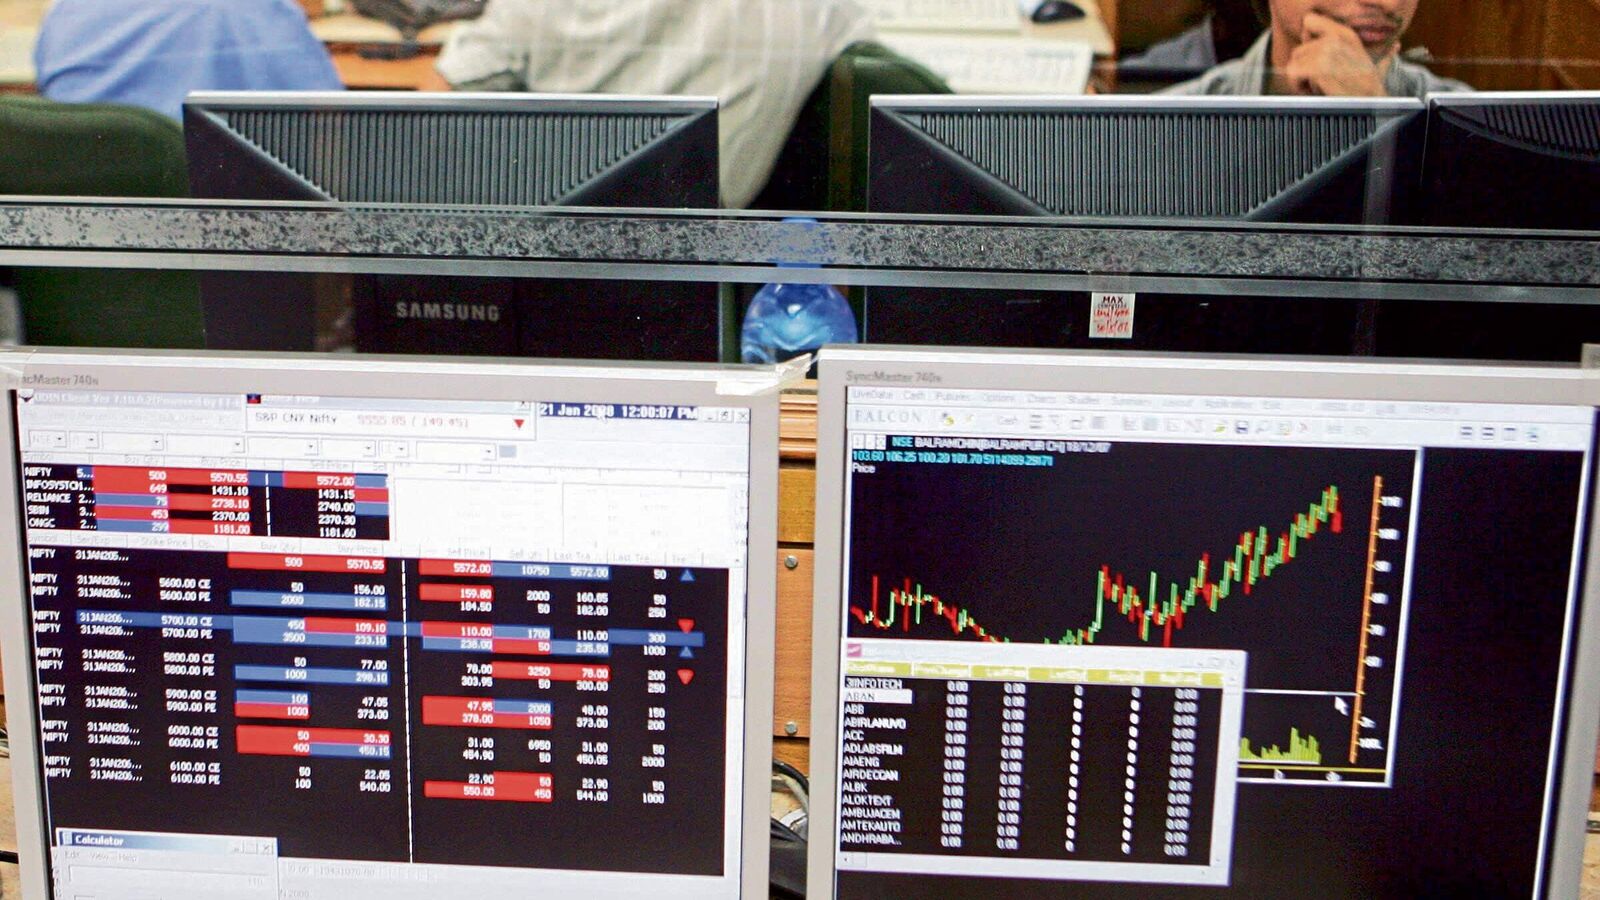 Nifty 50, Sensex today: What to expect from Indian stock market in trade on April 24